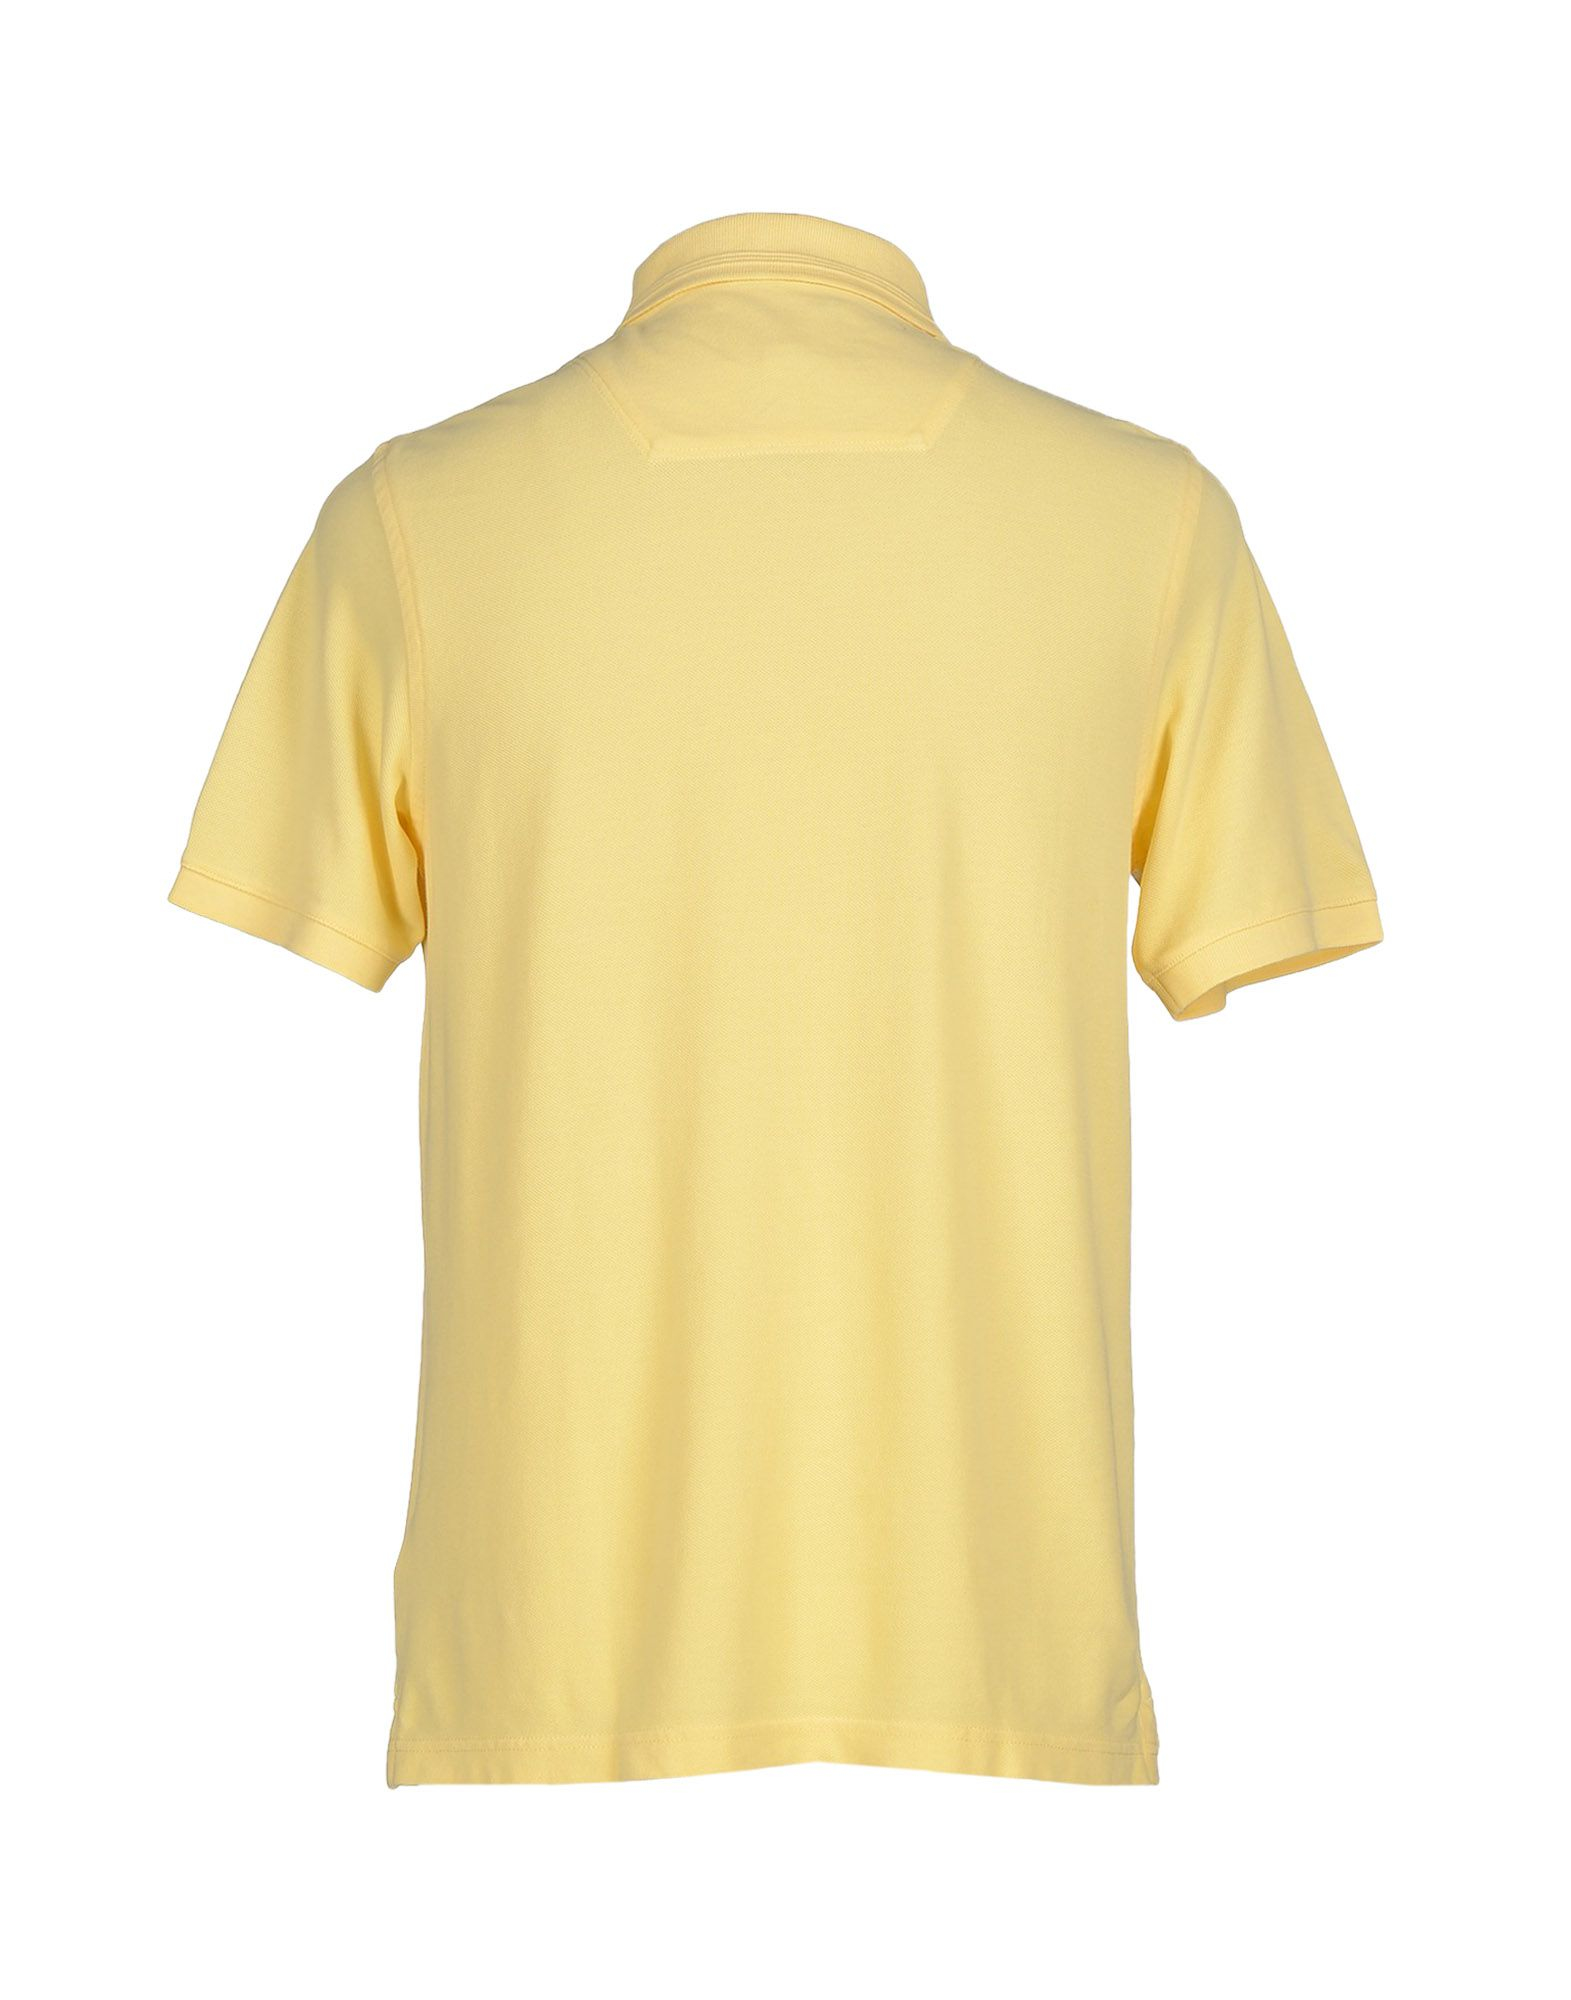 Lyst - Timberland Polo Shirt in Yellow for Men